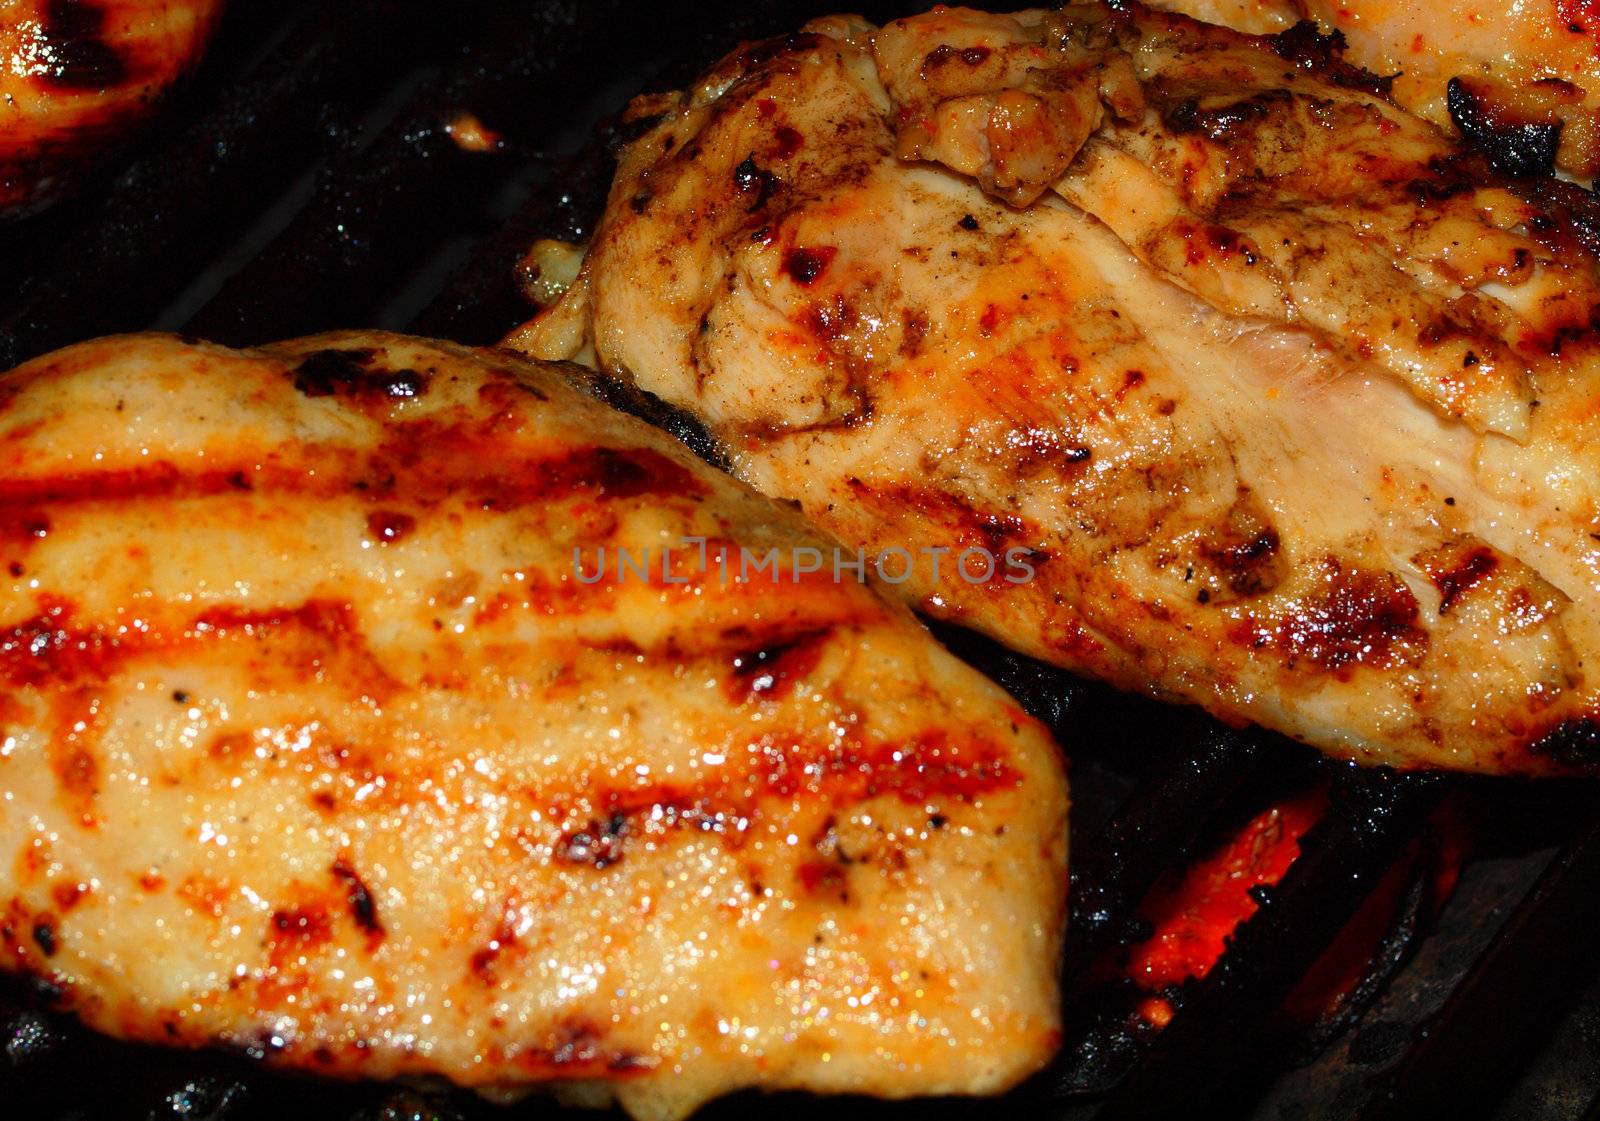 Fresh Grilled Chicken Breasts on the Barbecue